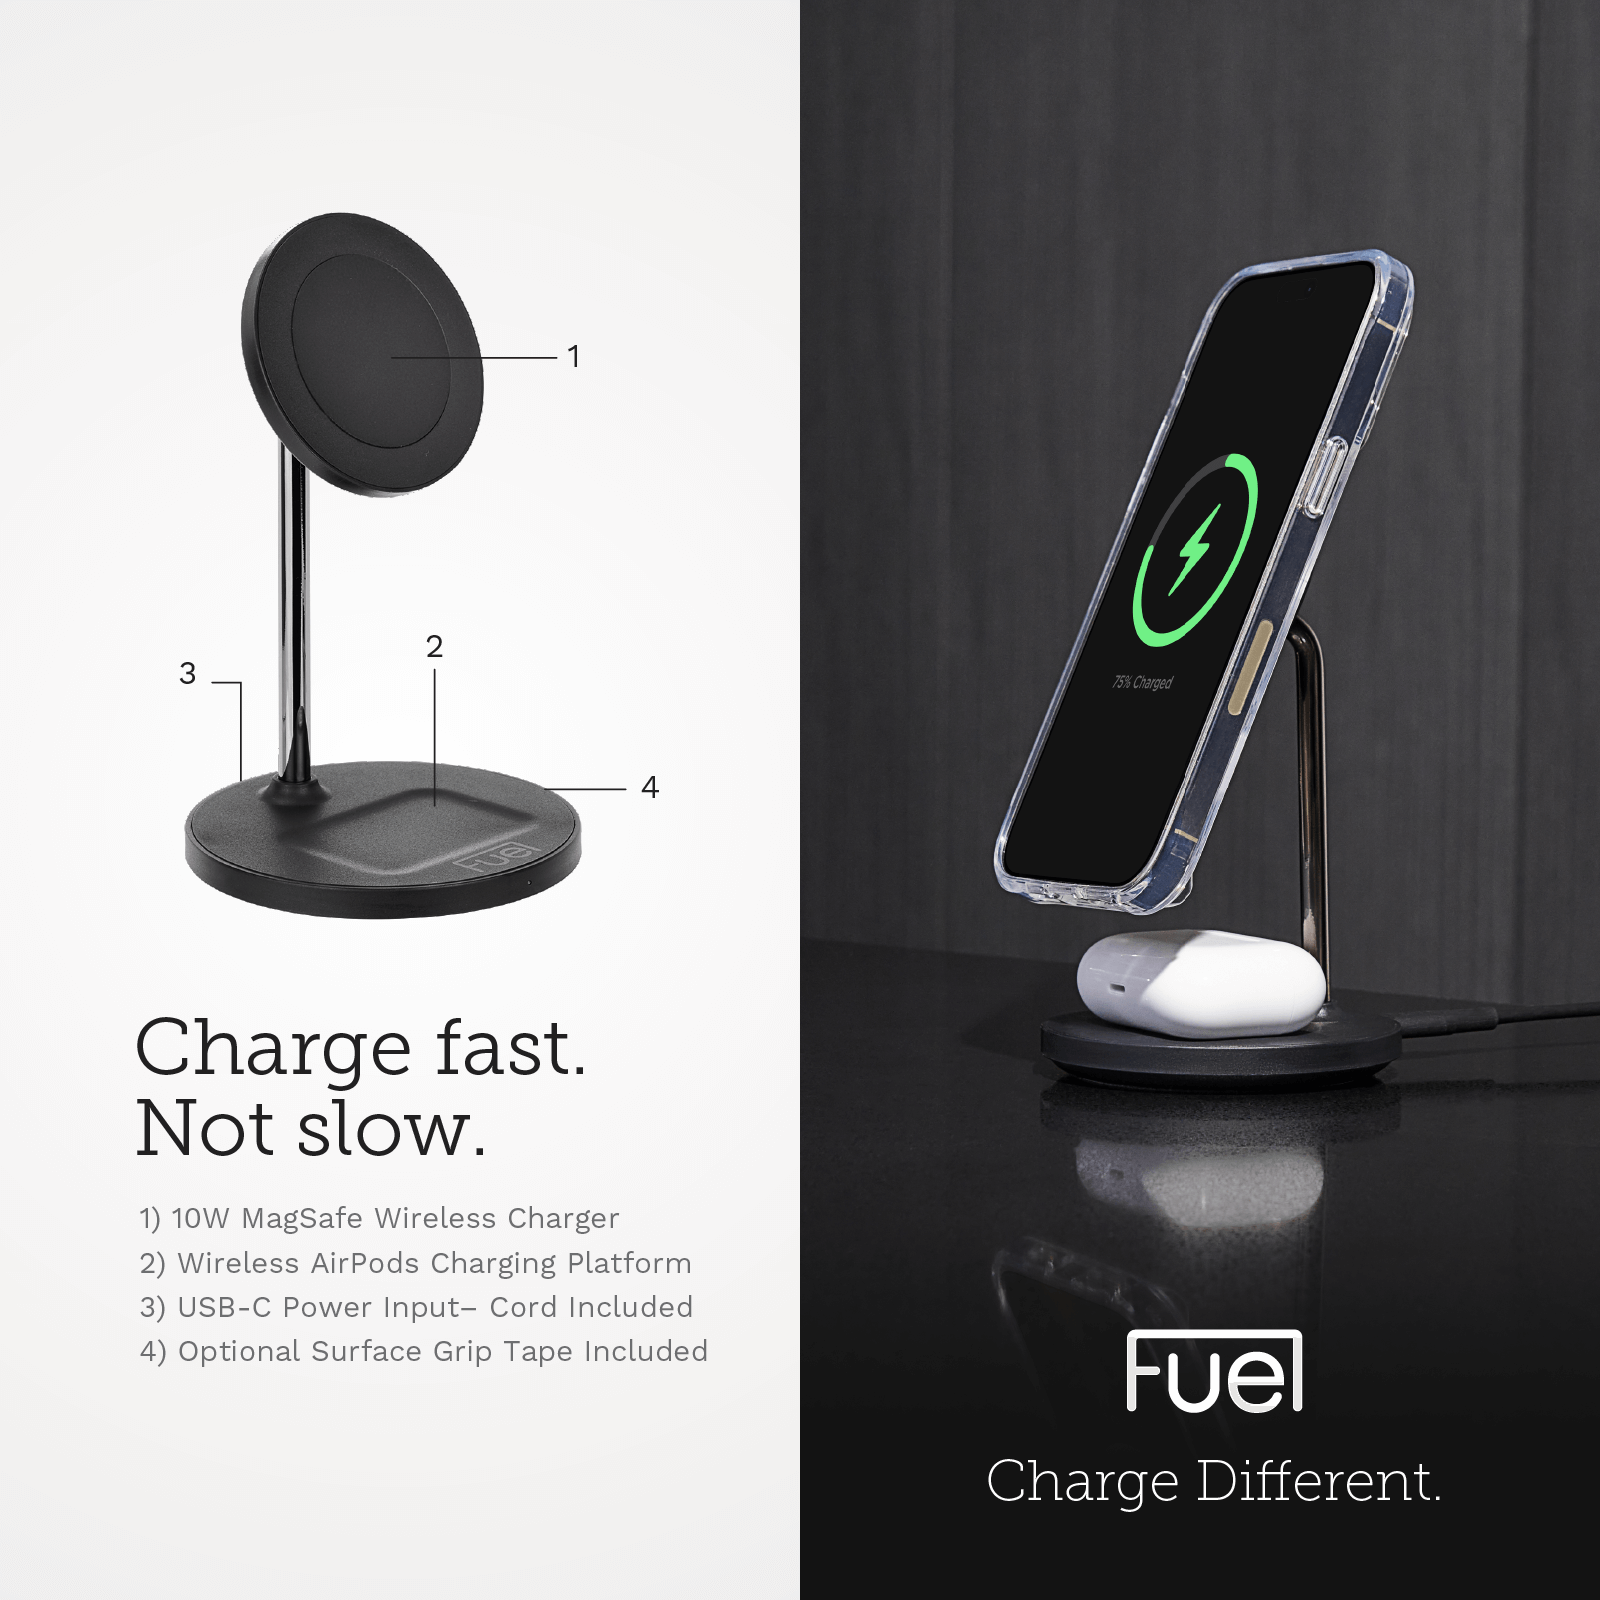 CHARGE FAST. NOT SLOW. 1) 10W MAGSAFE WIRELESS CHARGER/ 2) WIRELESS AIRPODS CHARGING PLATFORM. 3) USB-C POWER INPUT CORD INCLUDED. 4) OPTIONAL SURFACE GRIP TAPE INCLUDED.